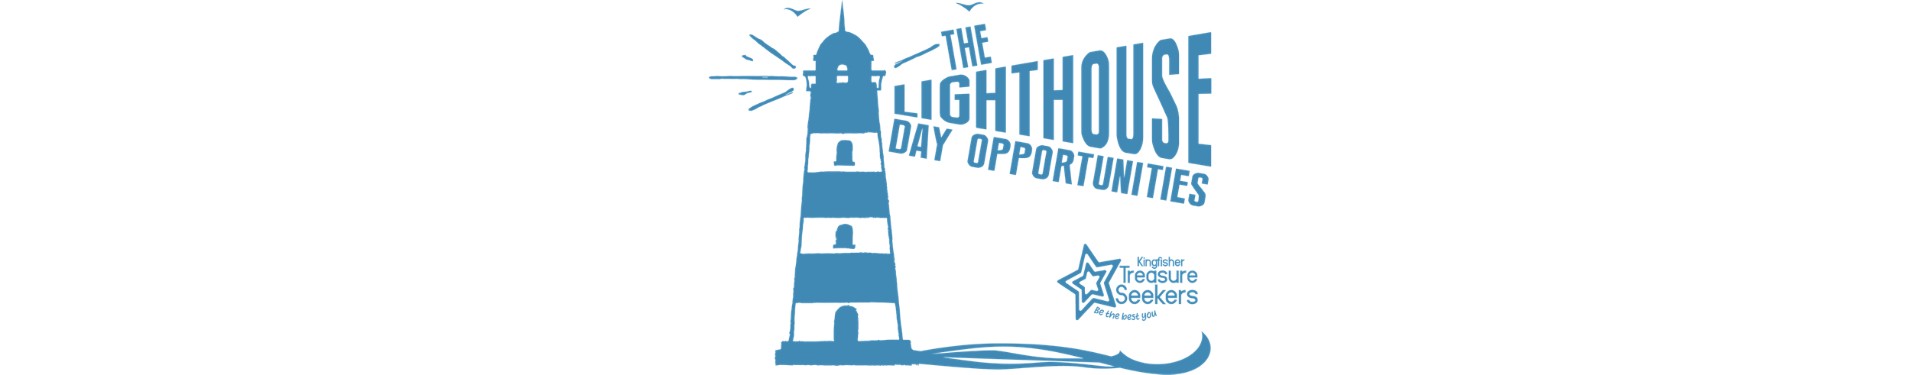 banner for the lighthouse